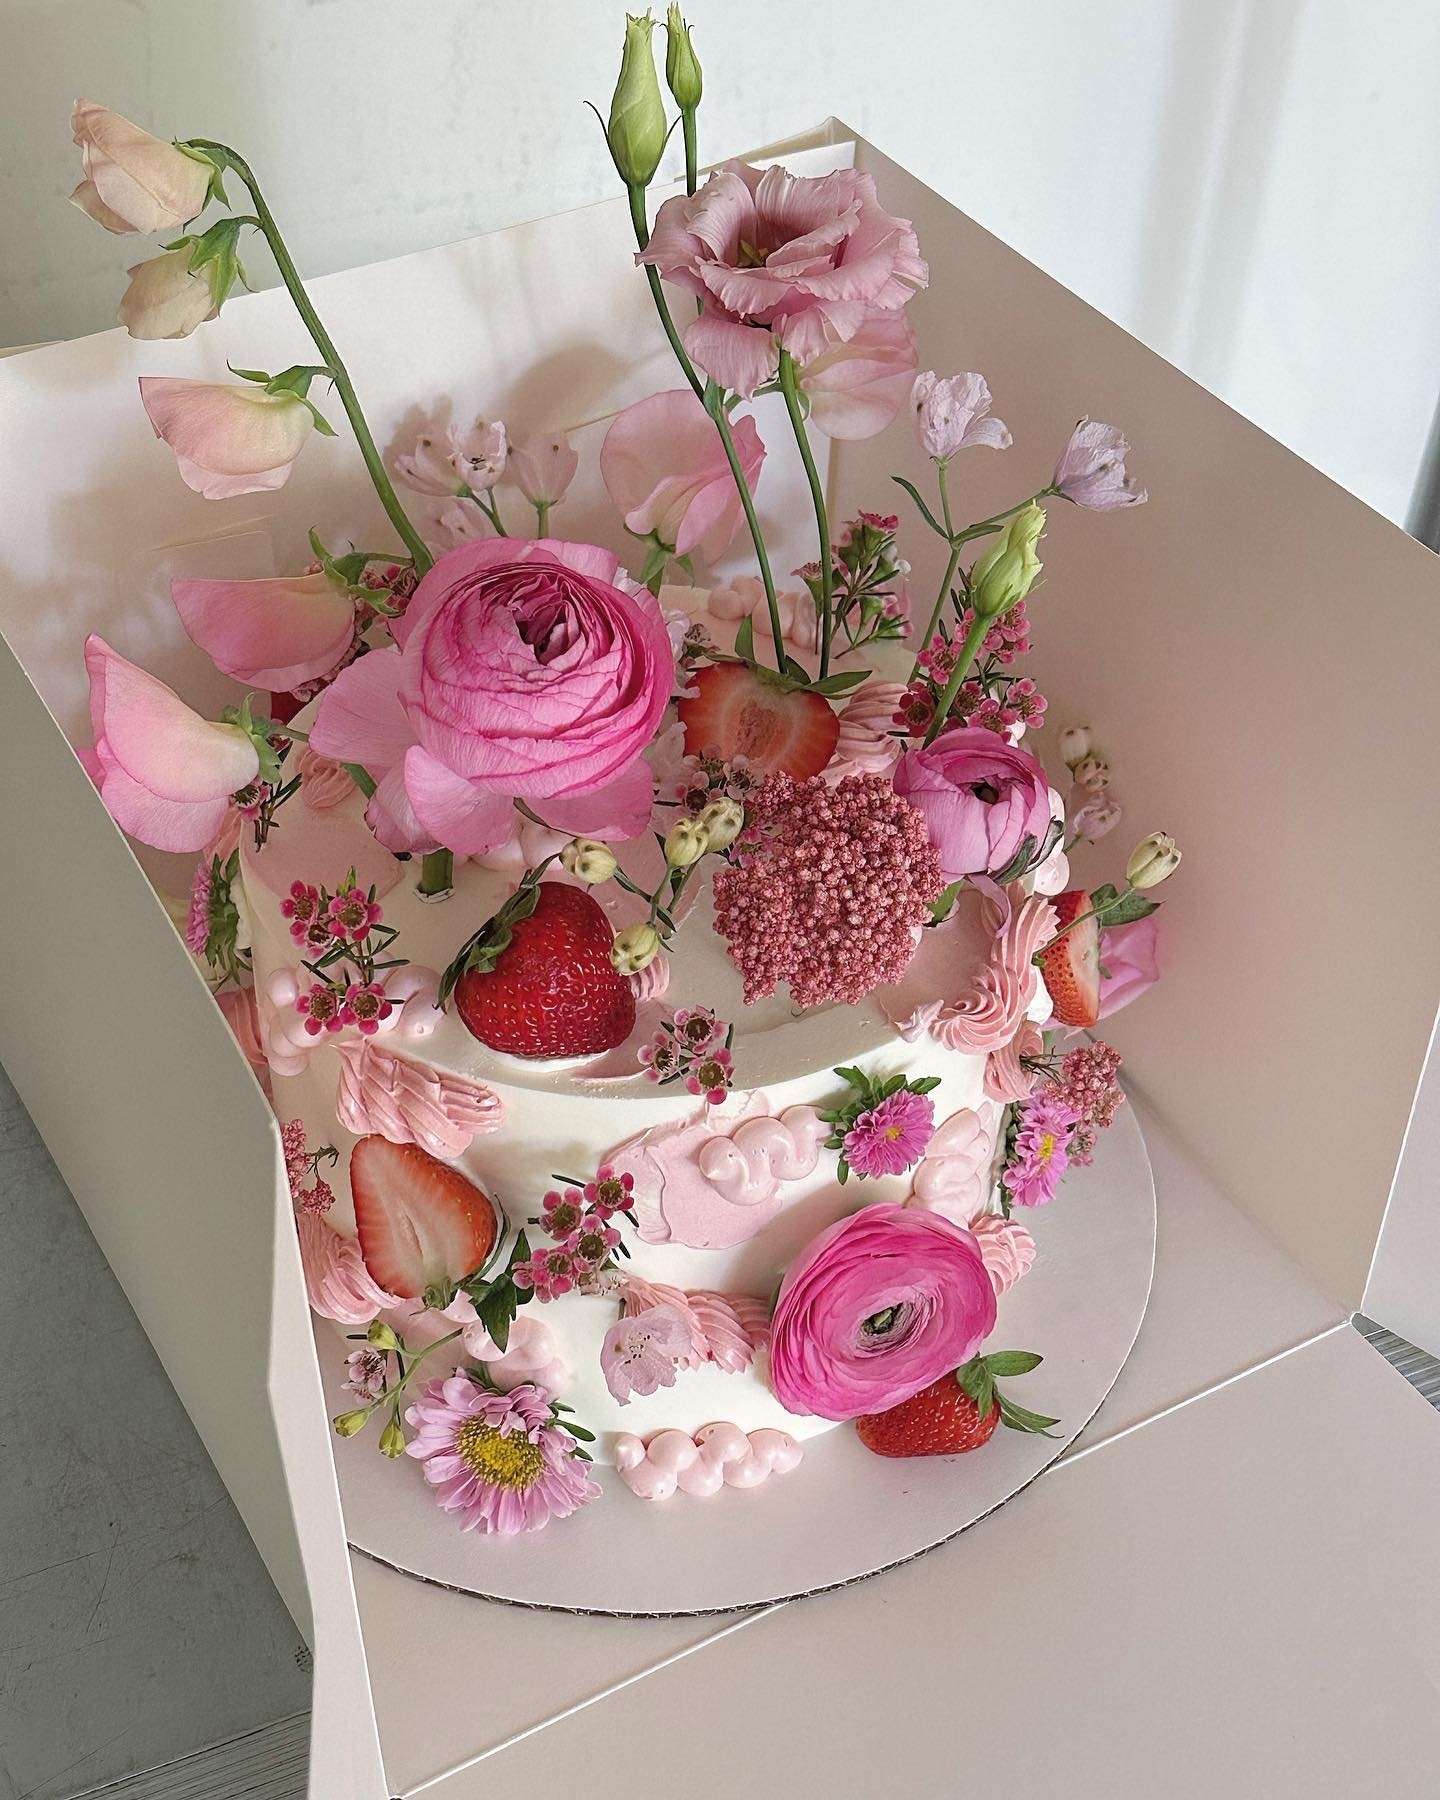 Pink floral cake by Tongtong Cake - Our most popular Instagram posts of the year